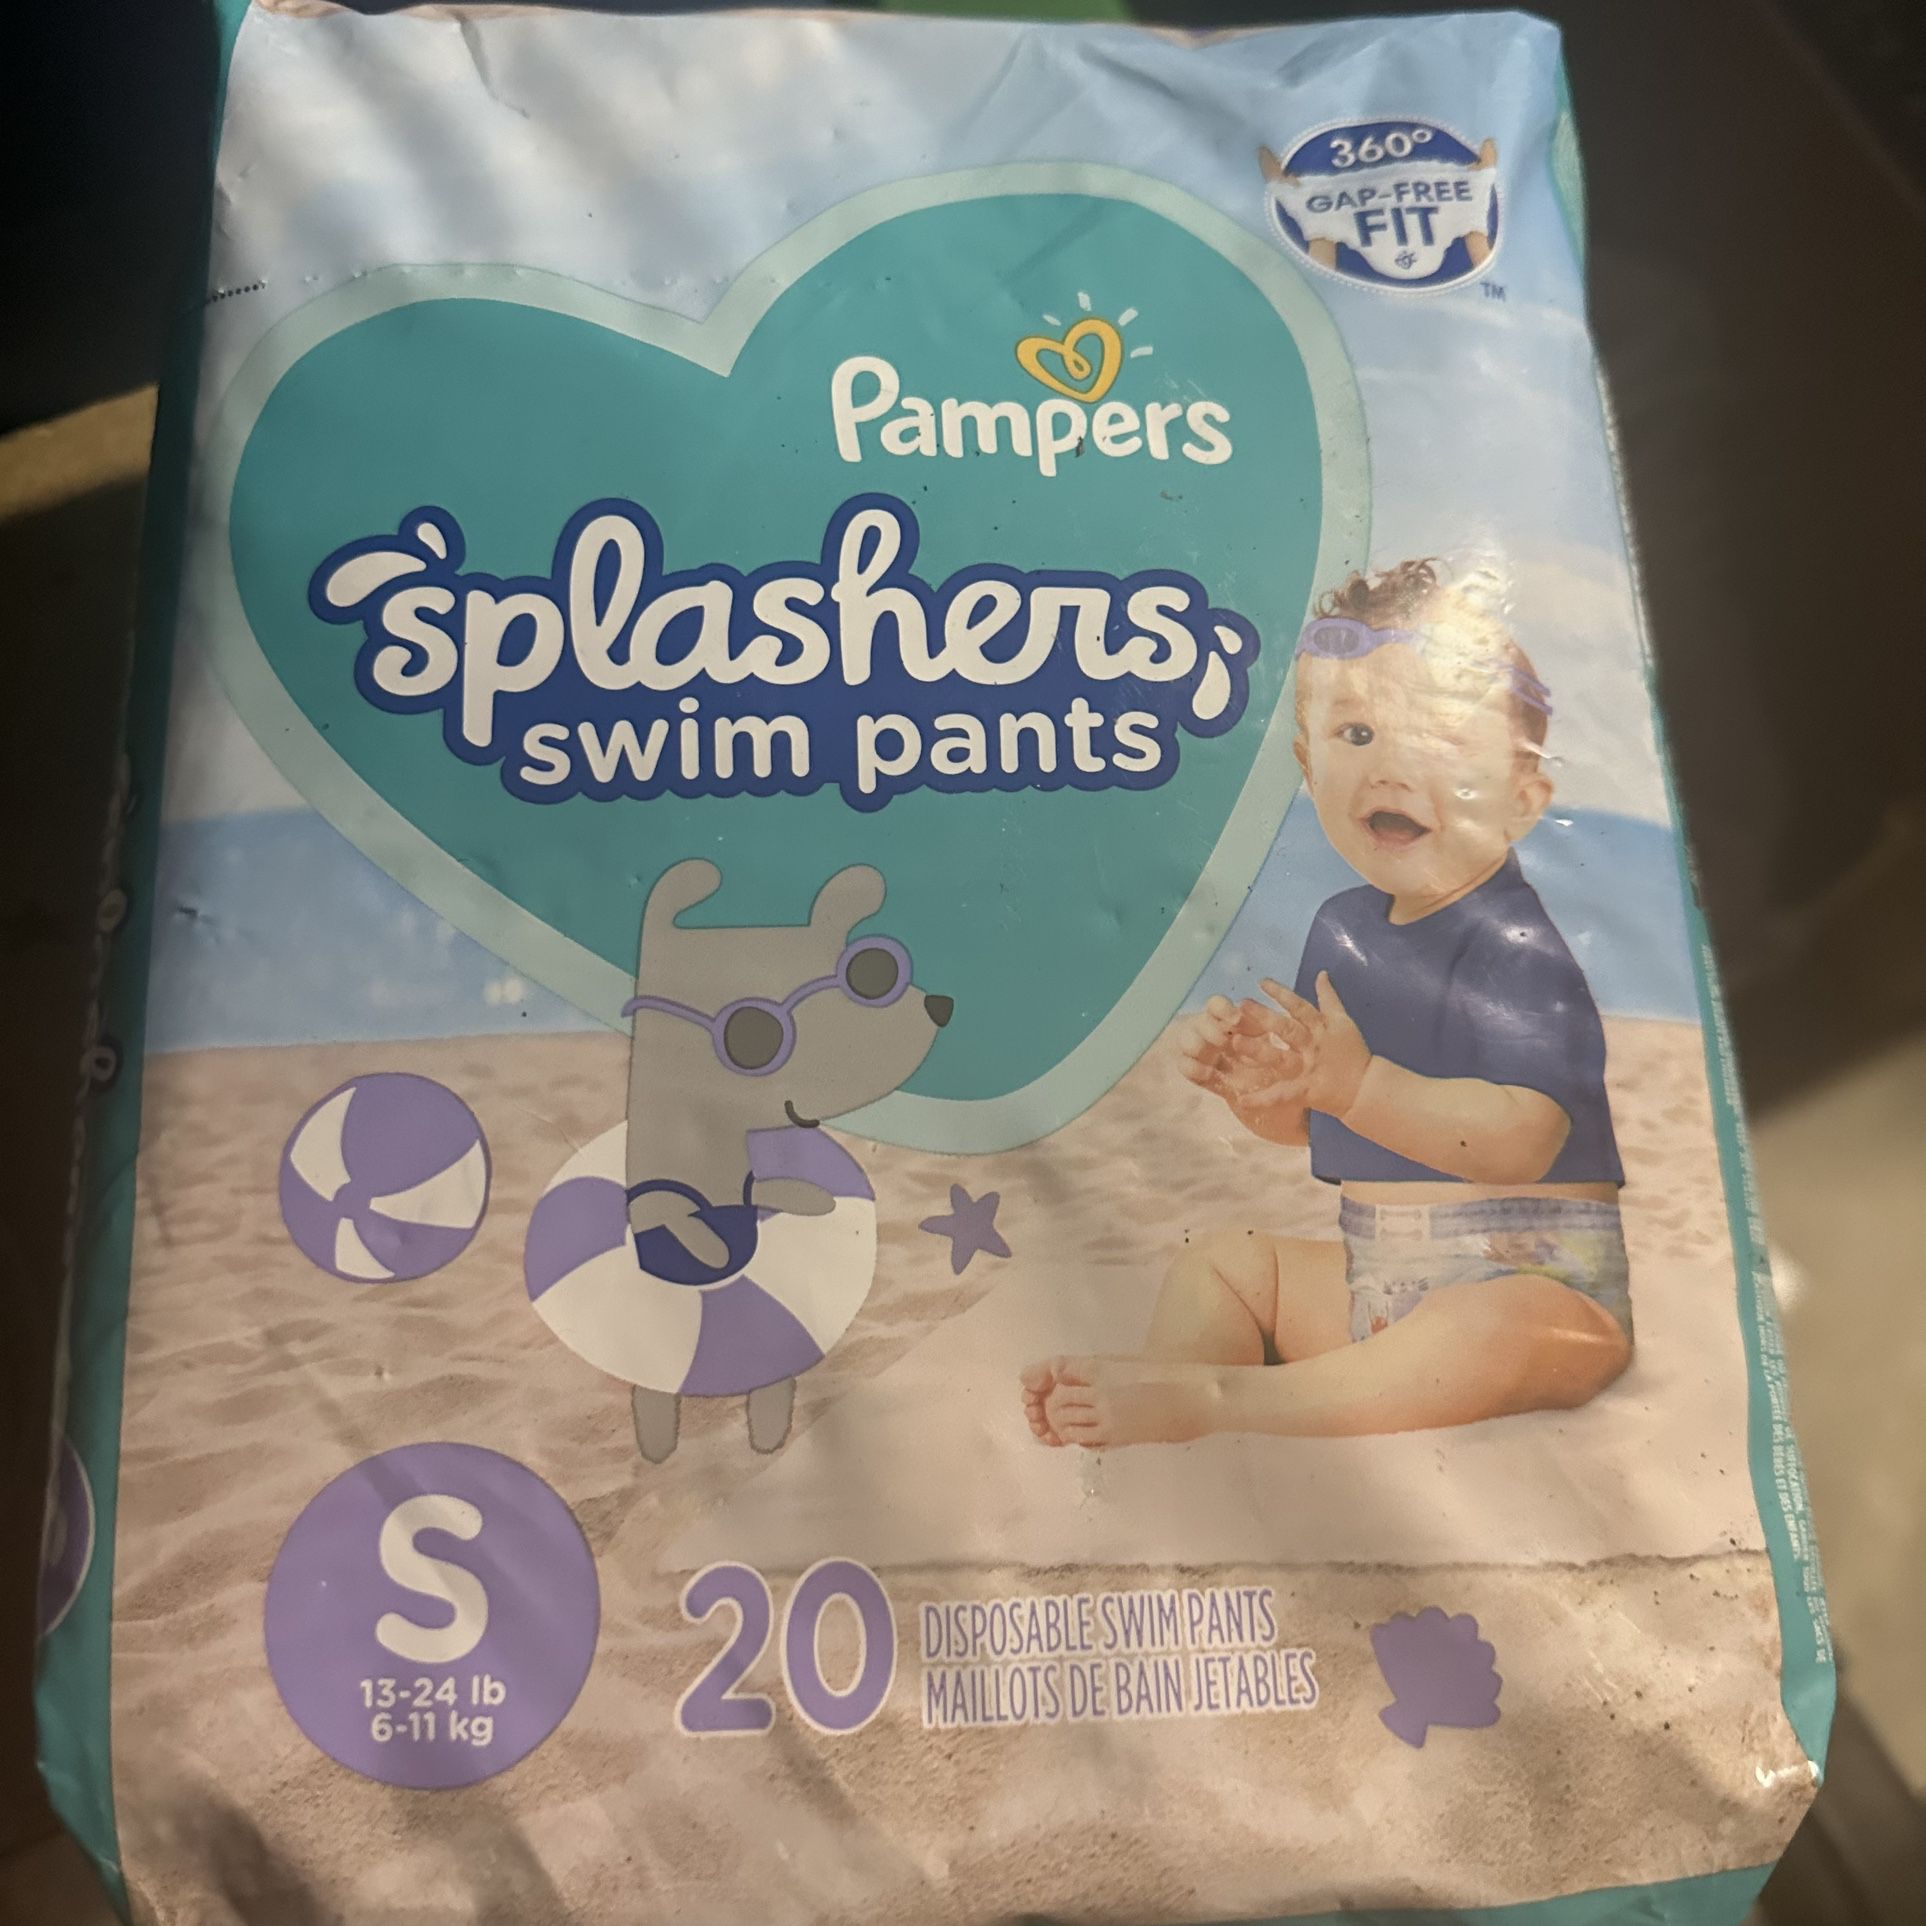 Pampers Splashers Diapers